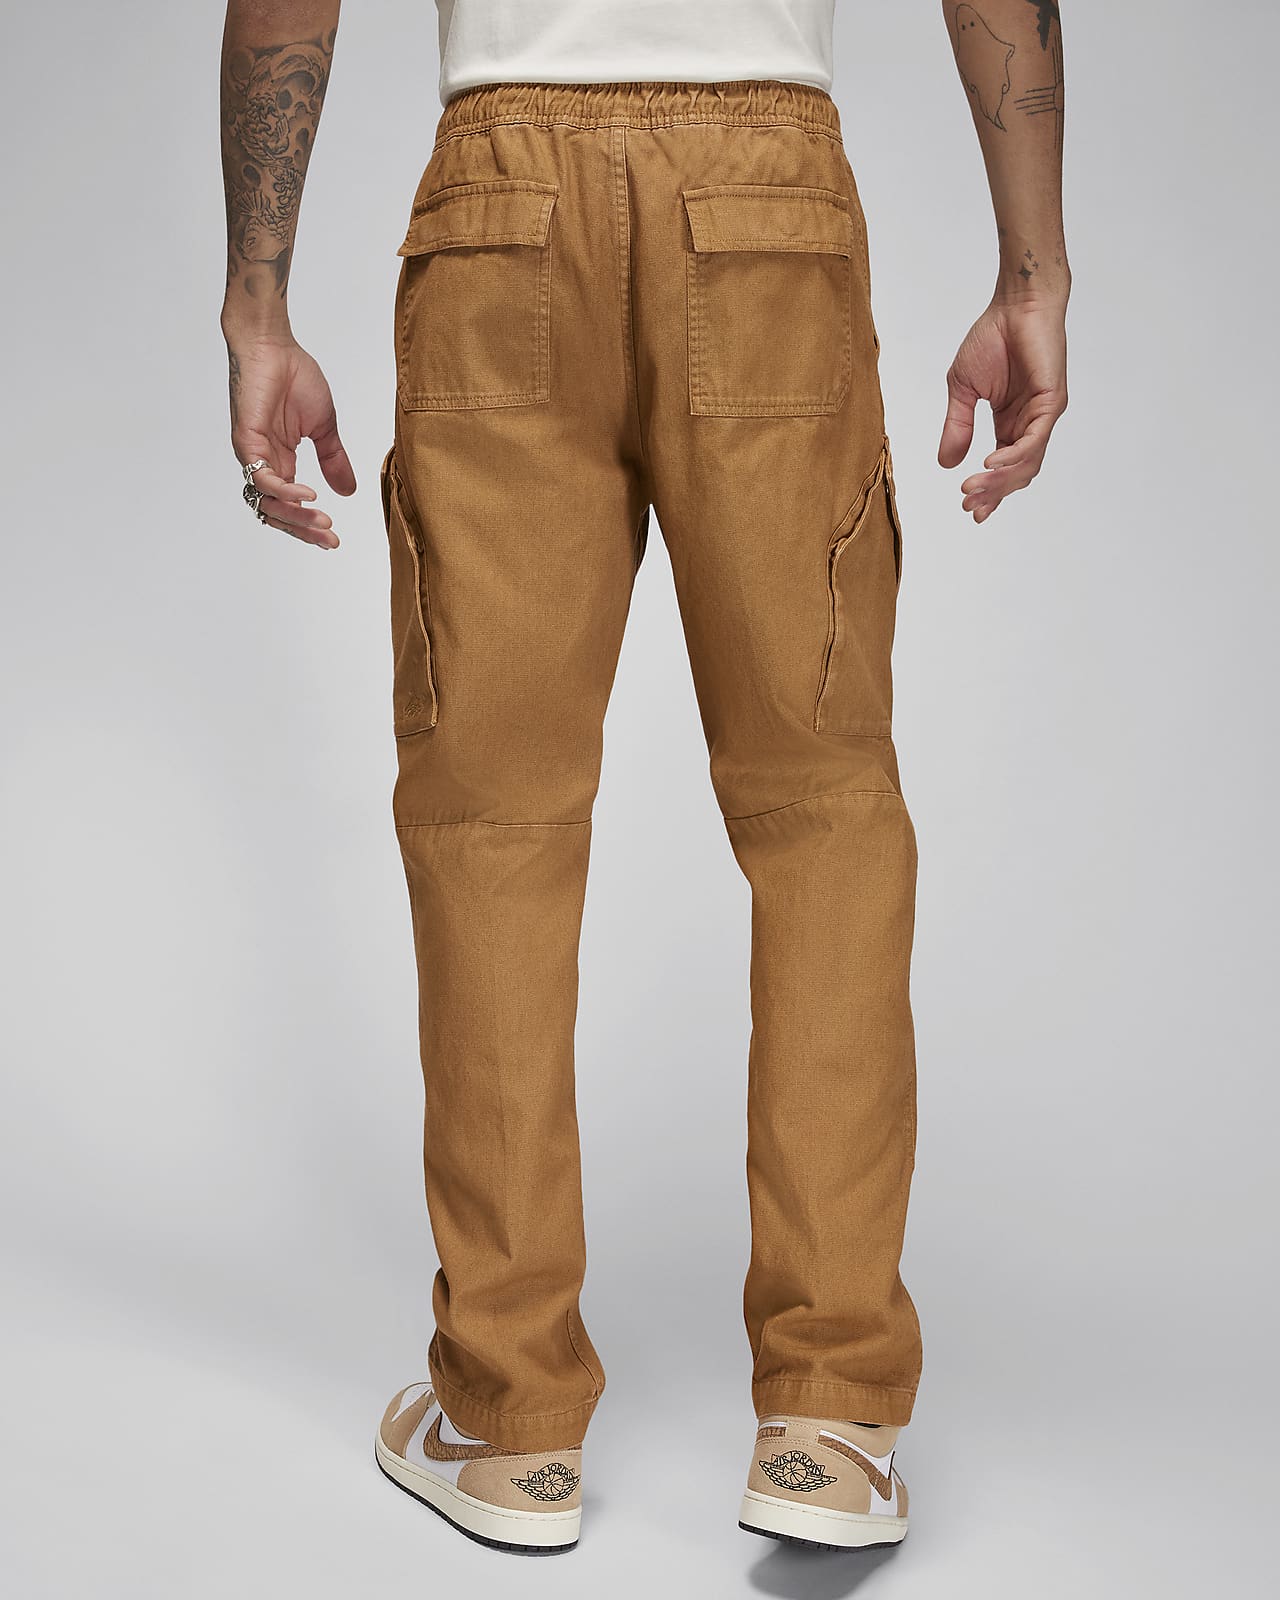 Buy Arrow Dark Flat Front Solid Formal Trousers - NNNOW.com